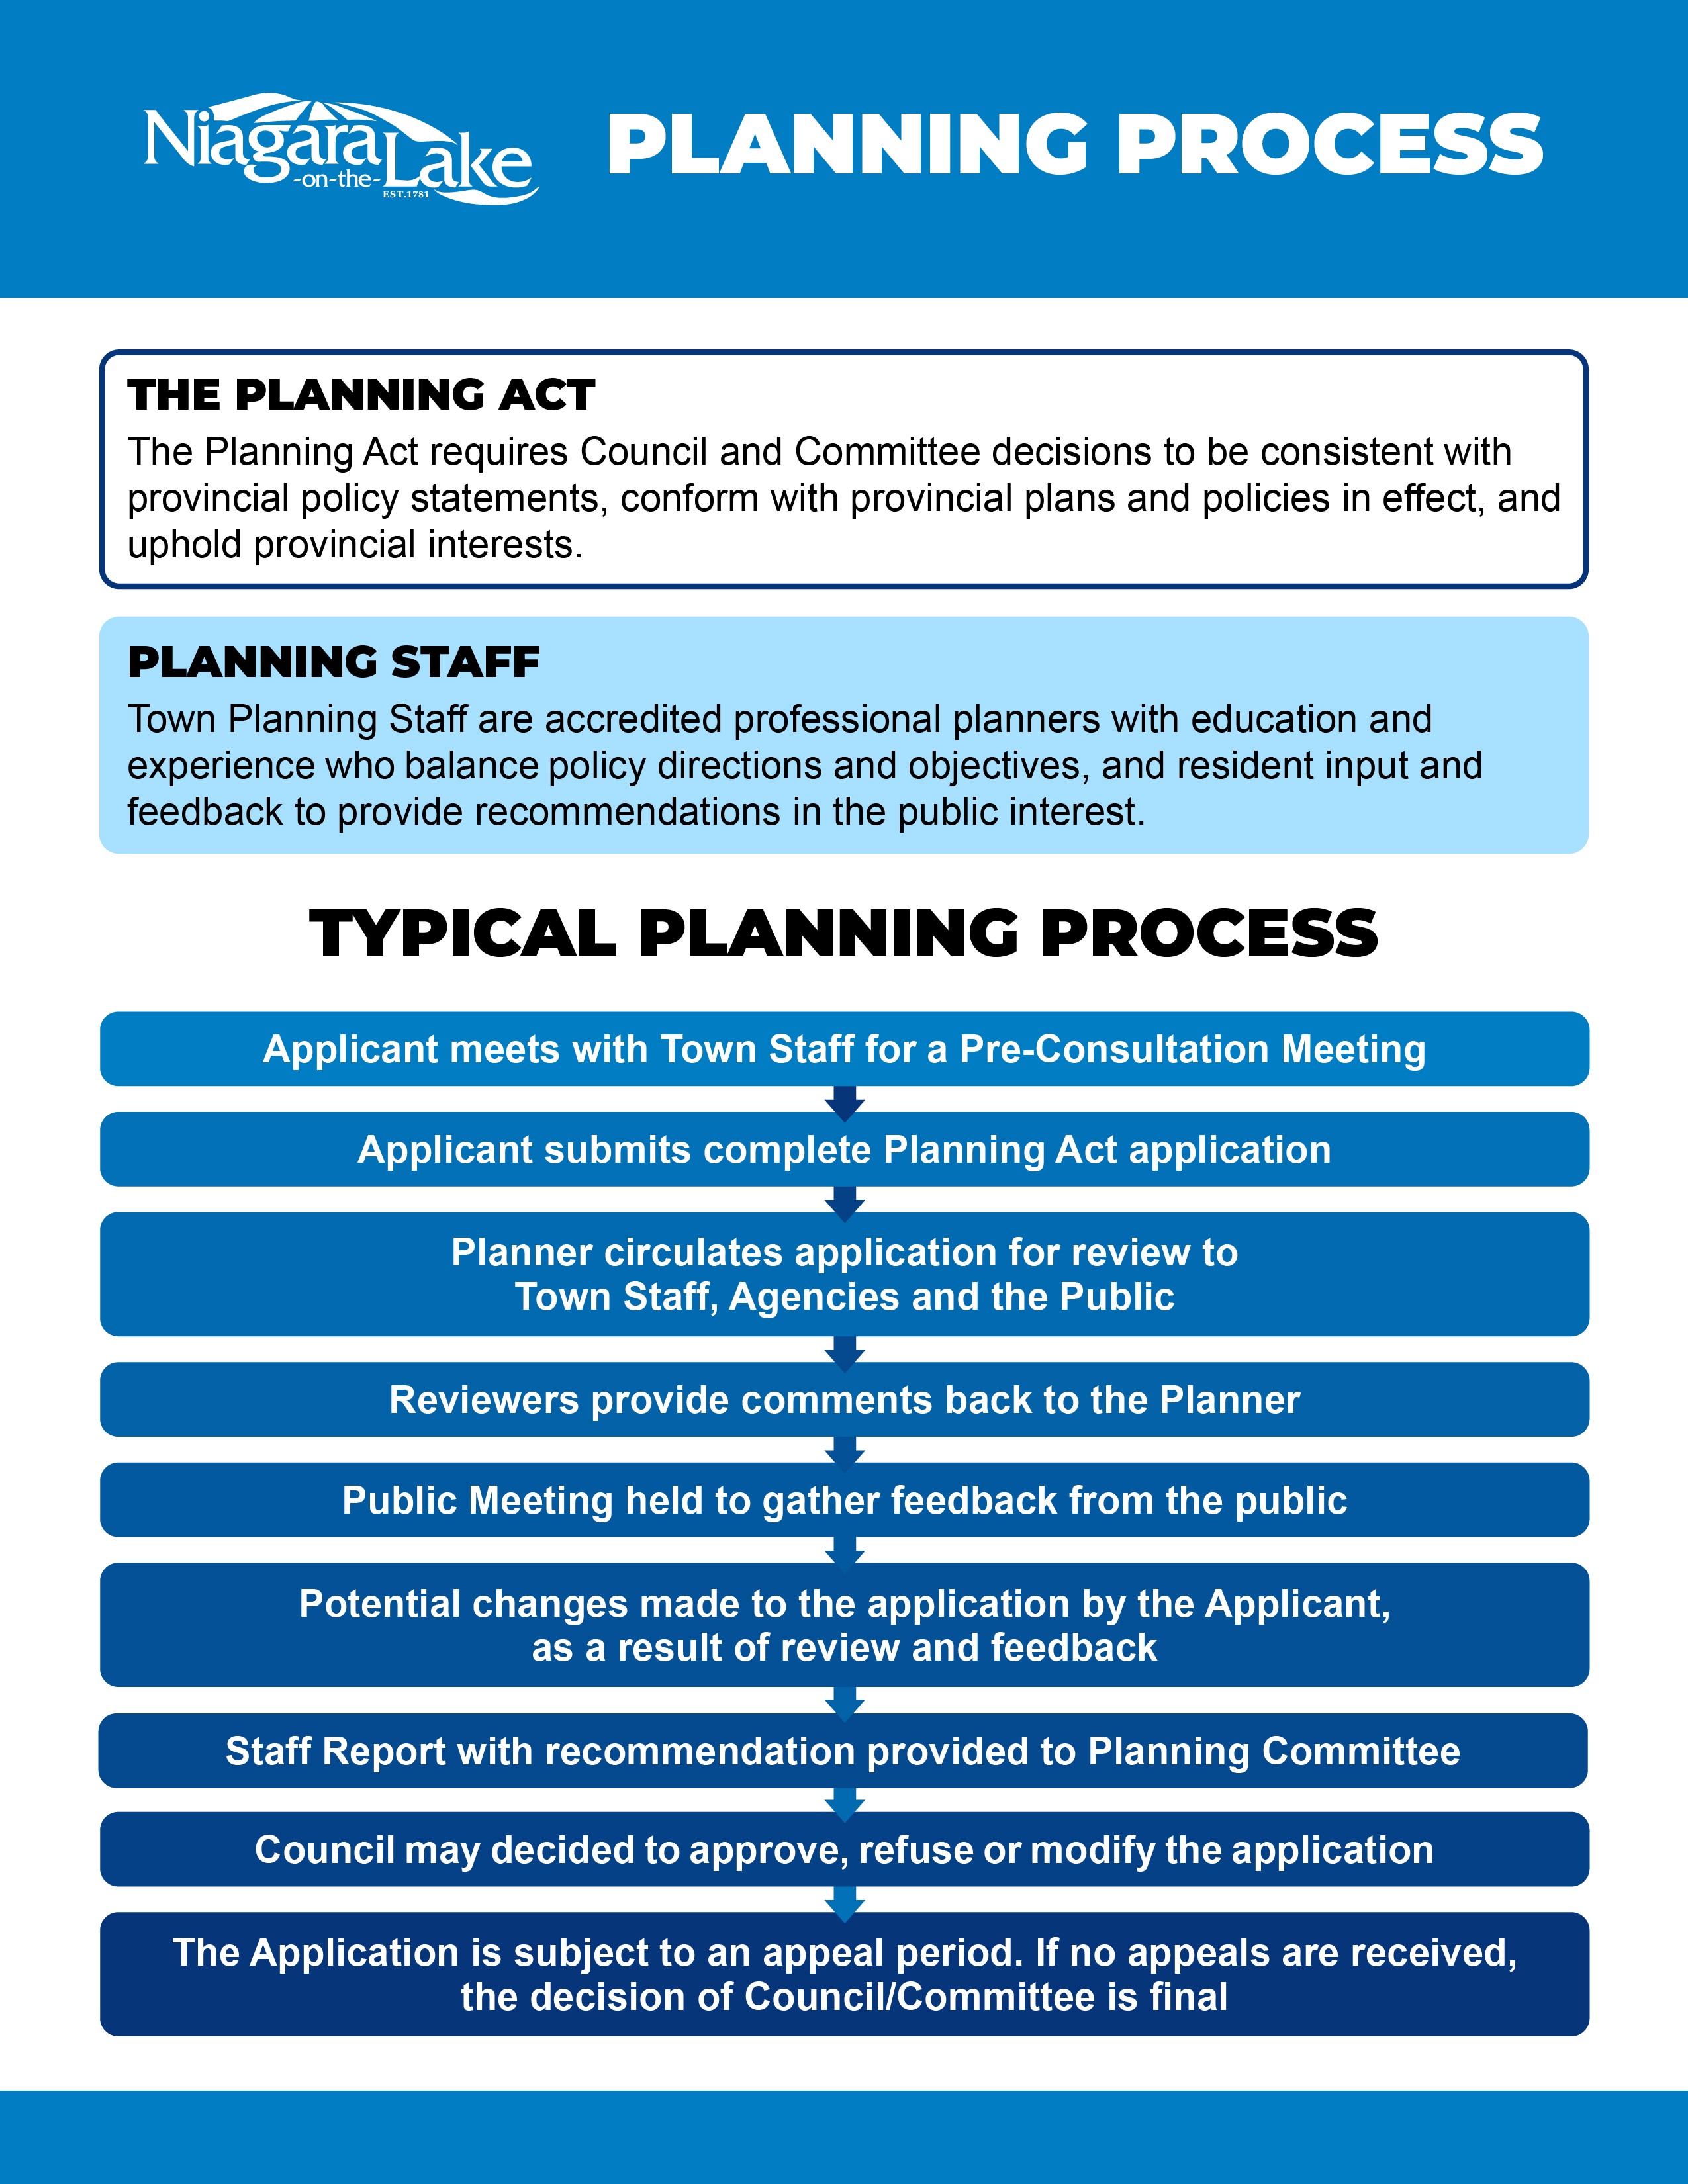 A visual describing the Town's typical planning process. An accessible friendly pdf is available above.